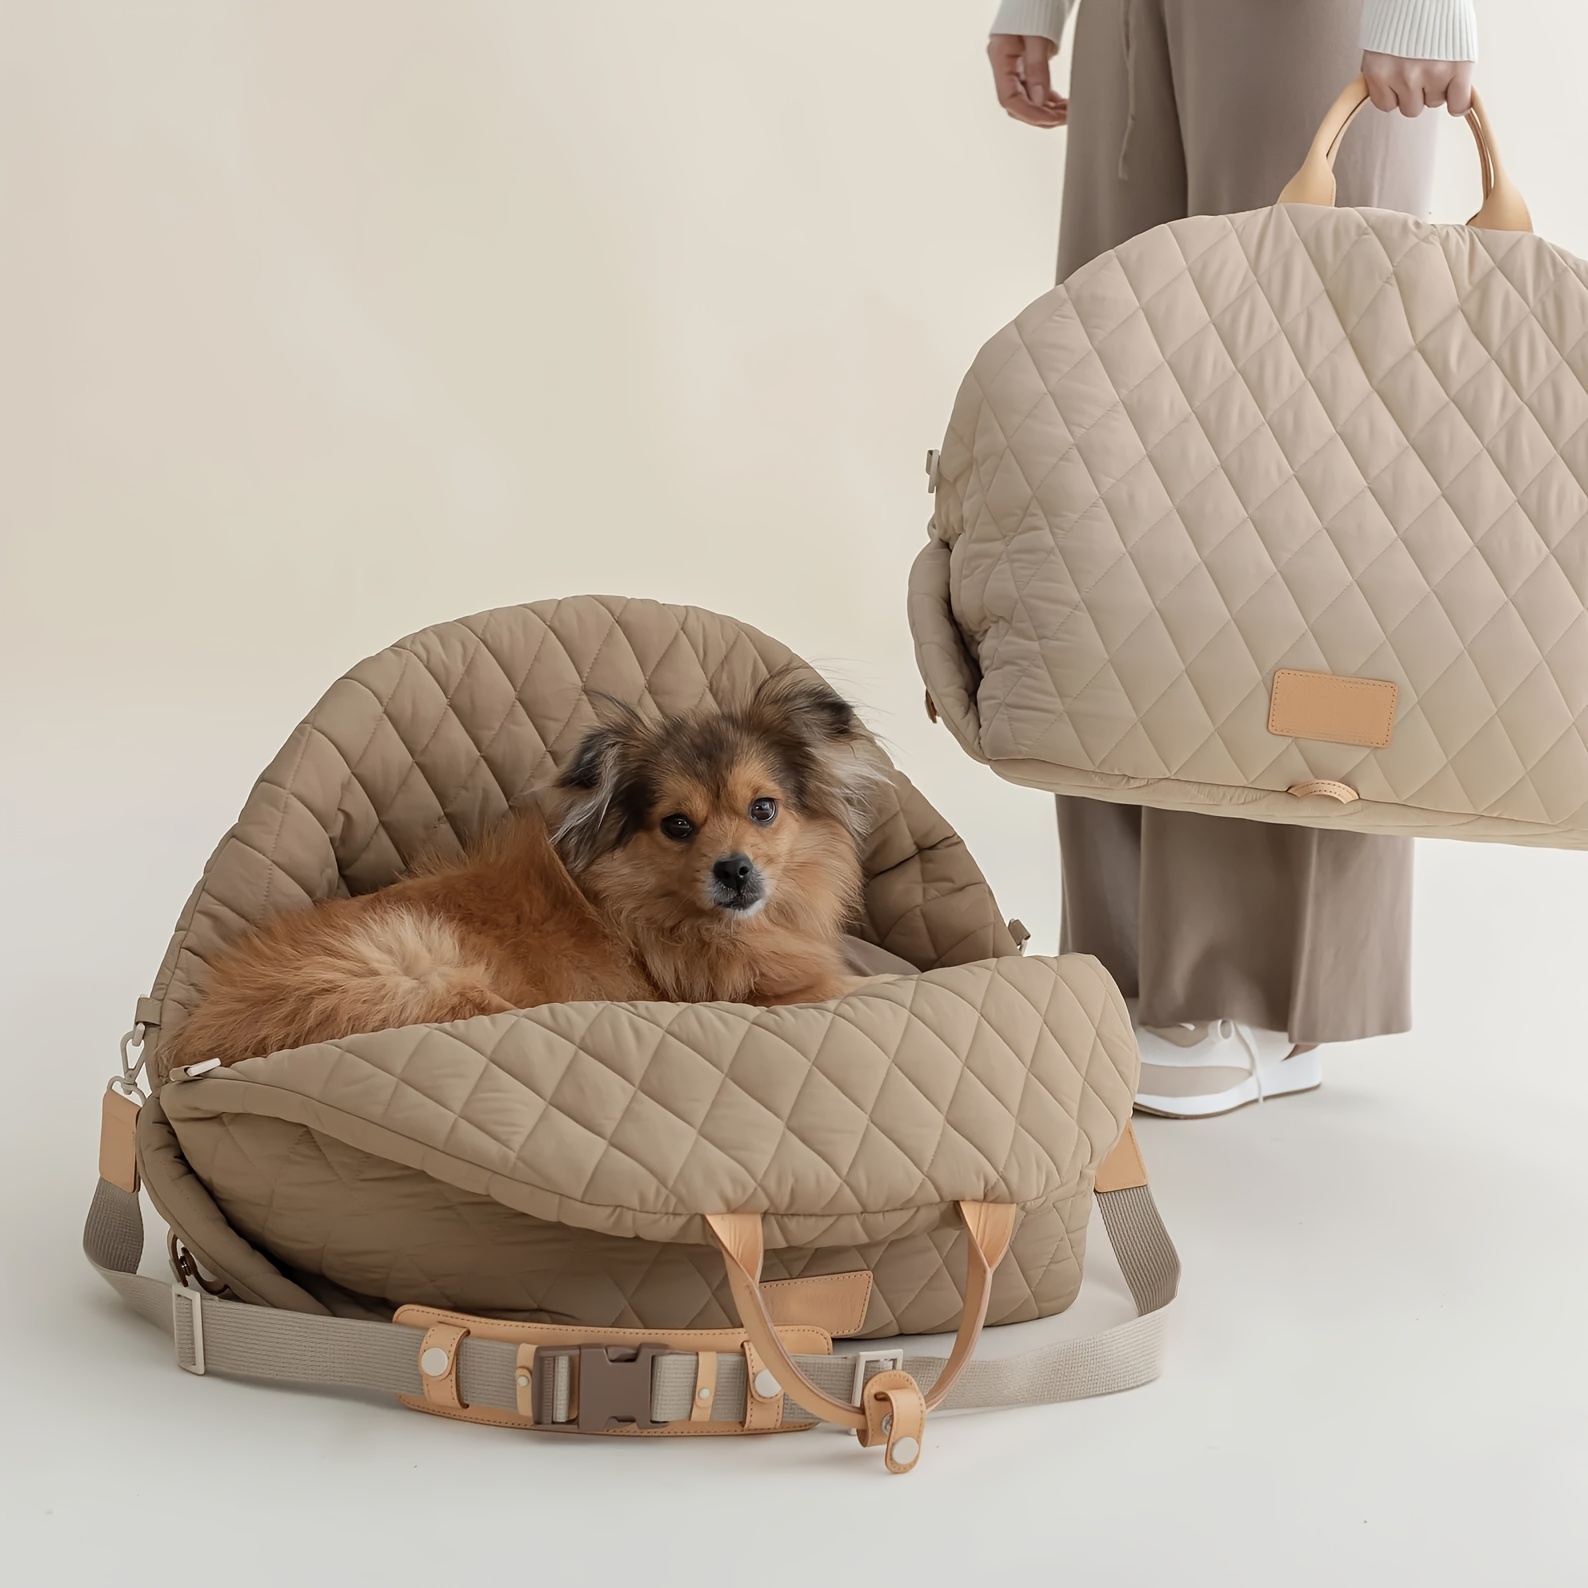 

Portable Pet Carrier Bag Dual Purpose Pet Tote And Dog Car Seat - Carry Your Dog Or Cat Safely With Harness Attachment